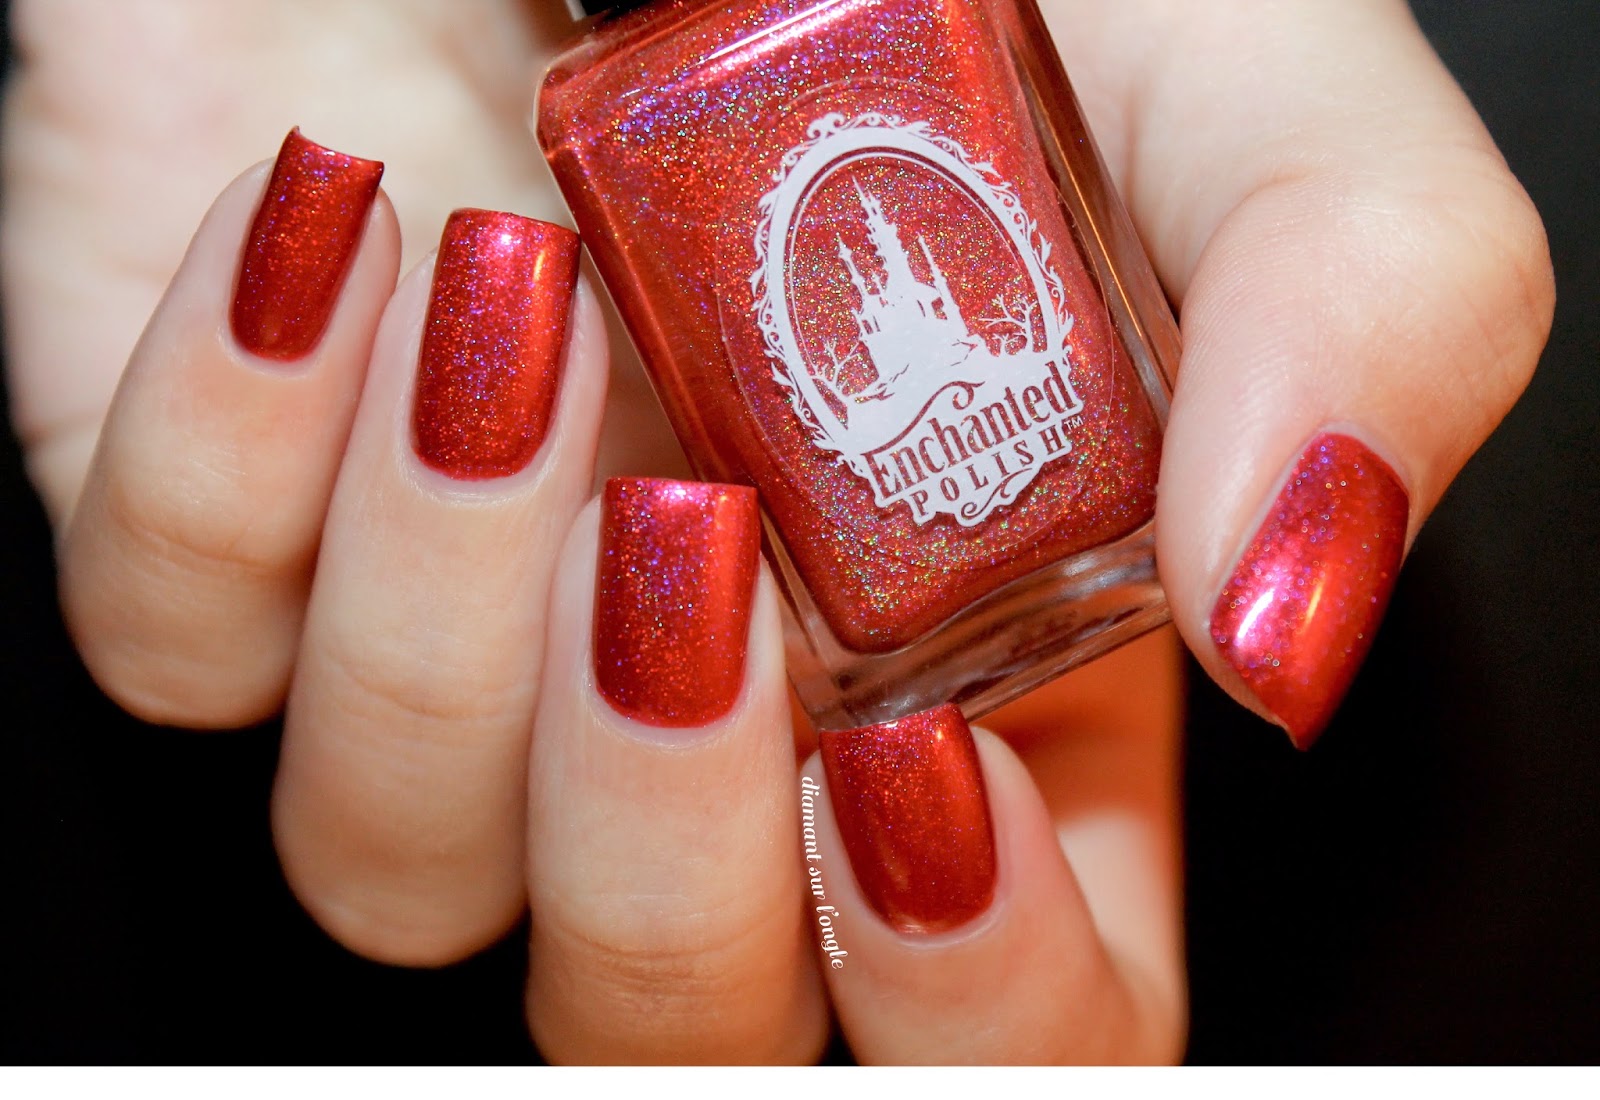 Swatch of July 2014 by Enchanted Polish